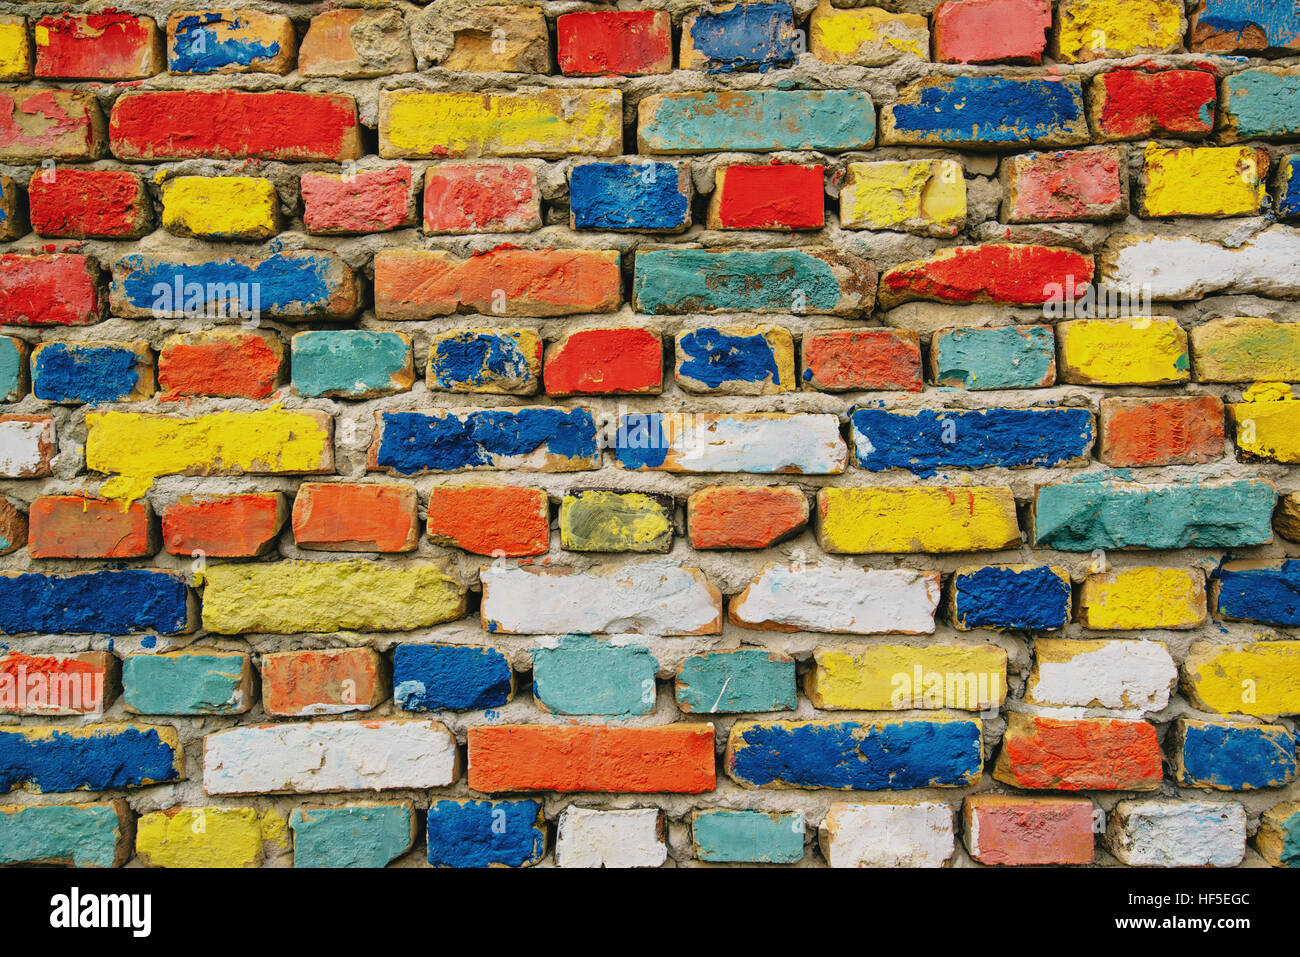 Multicolored painted bricks, exterior wall as background, urban pattern Stock Photo